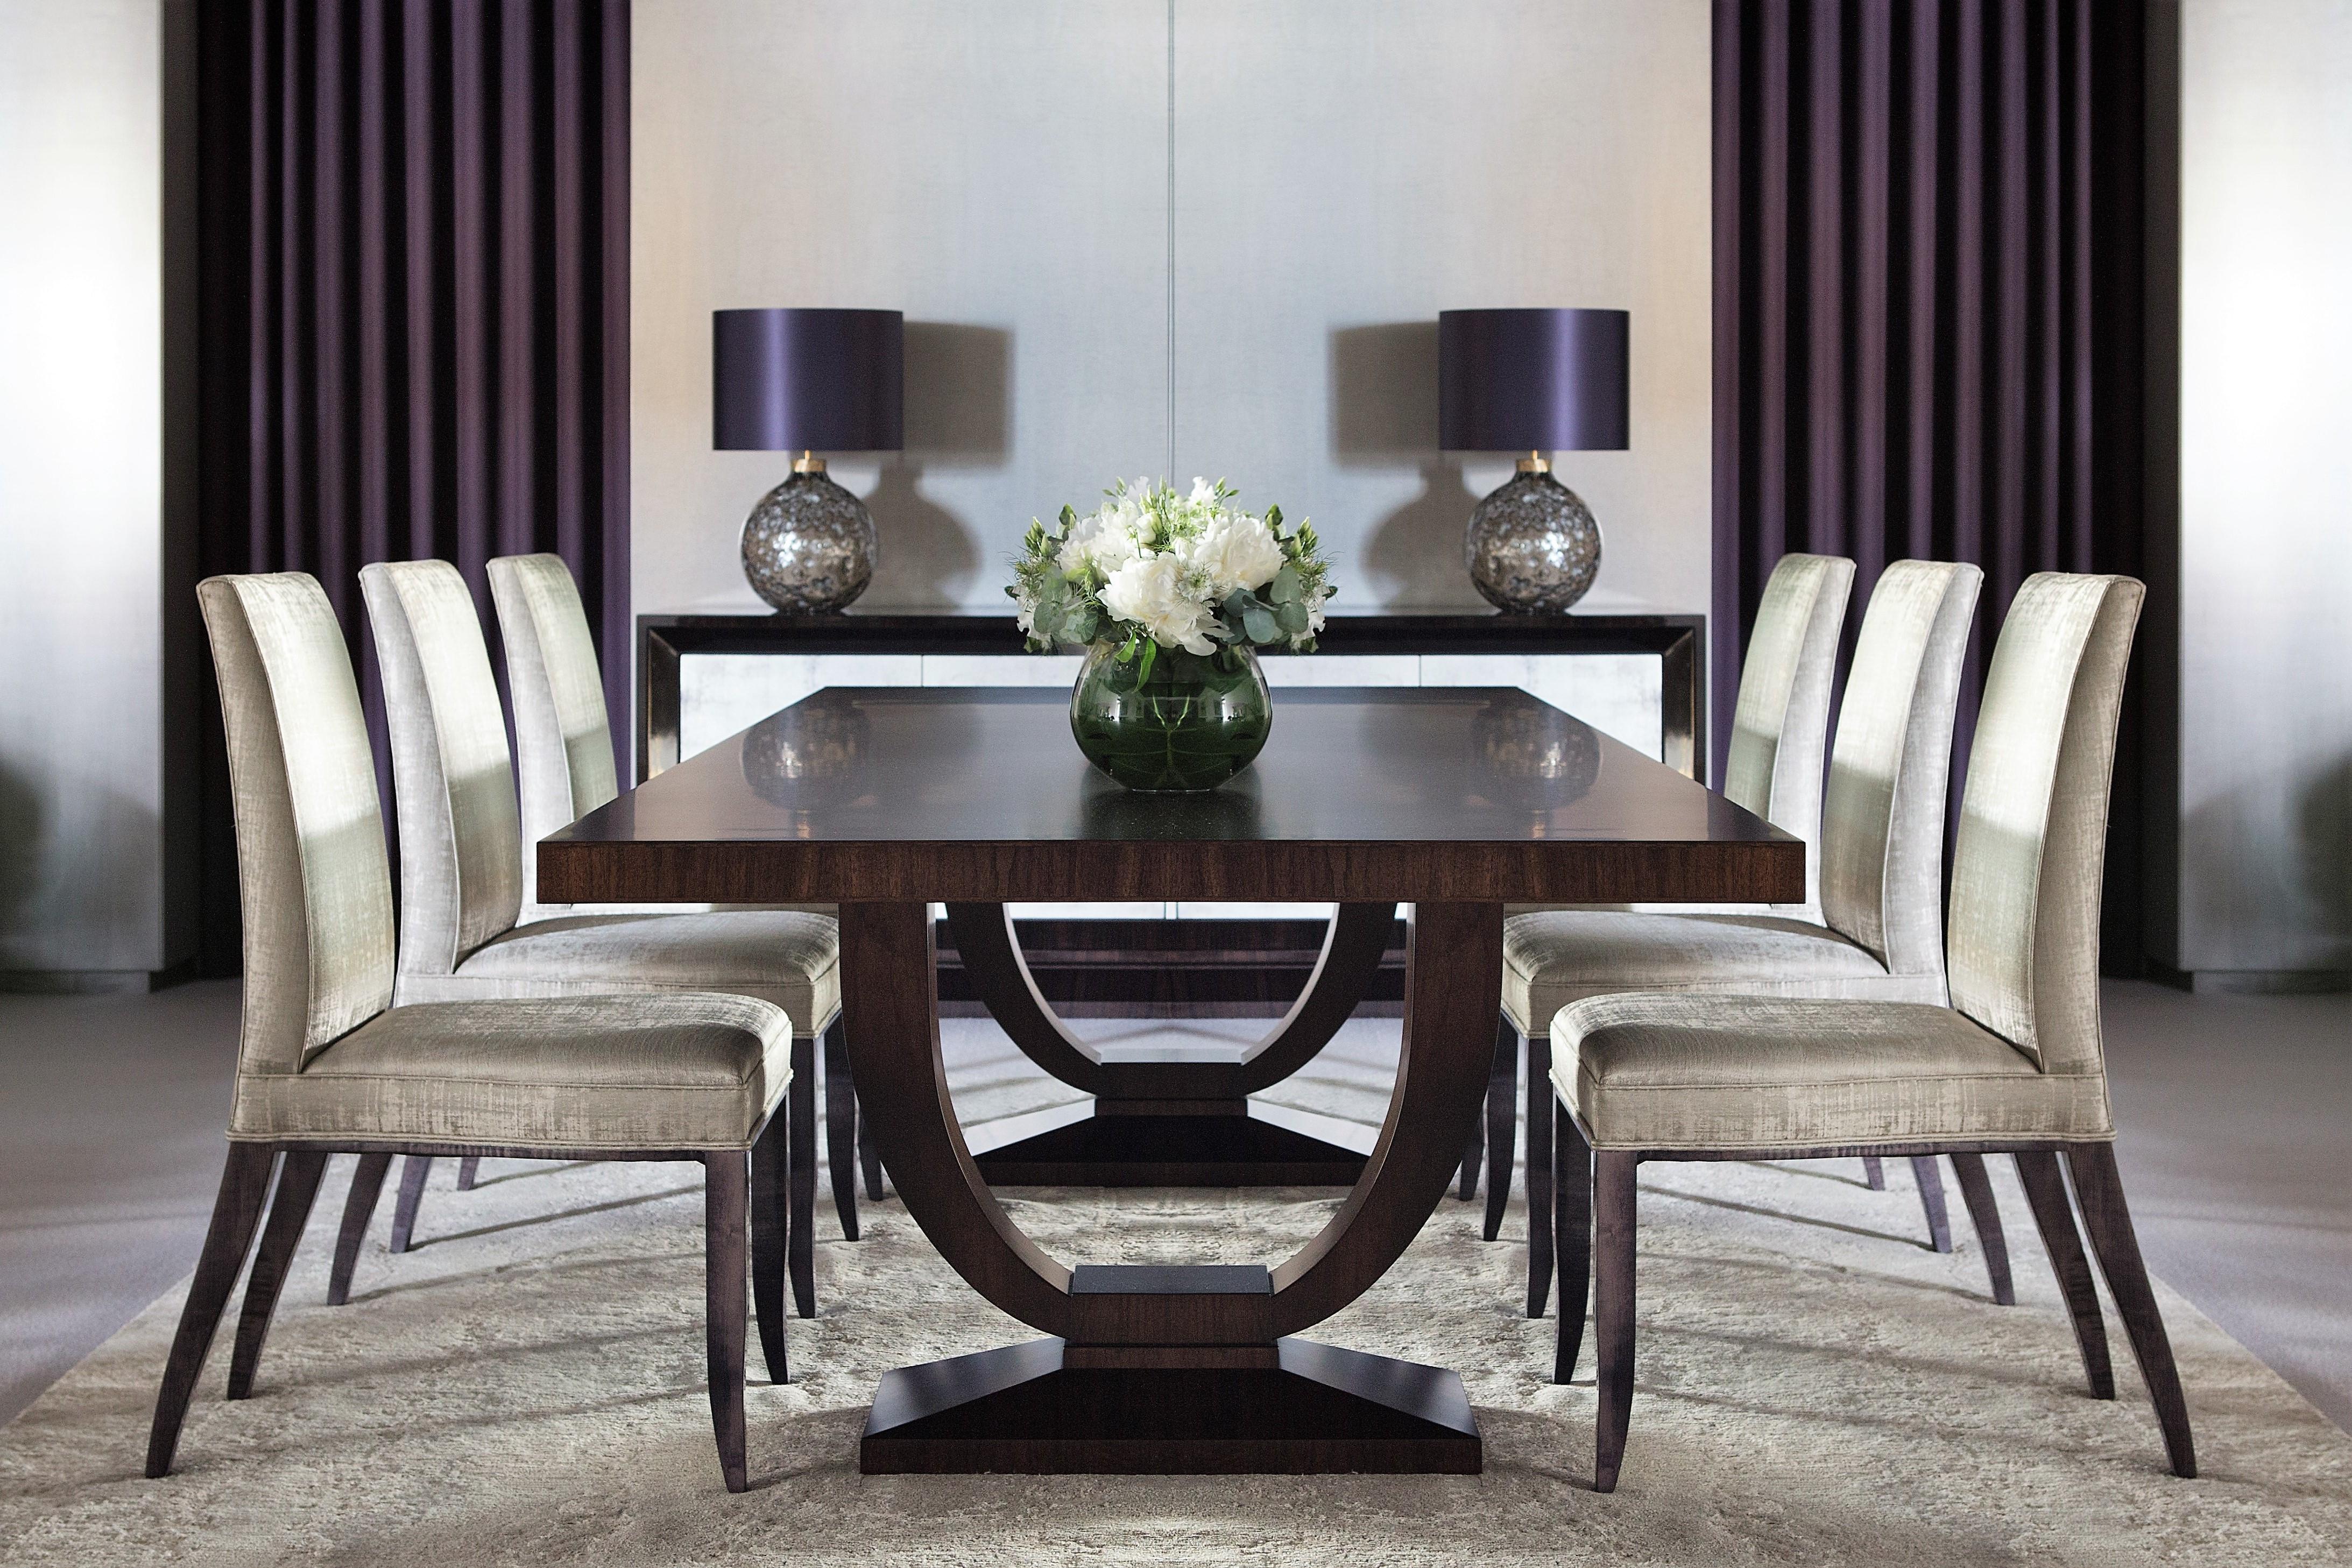 The ultimate Davidson dining table finished in sycamore stone with ebonised detailing.

With its Classic yet timeless appeal, this table is an investment to last a lifetime, exuding sophisticated Art Deco style and elegance.

For maximum glamour,